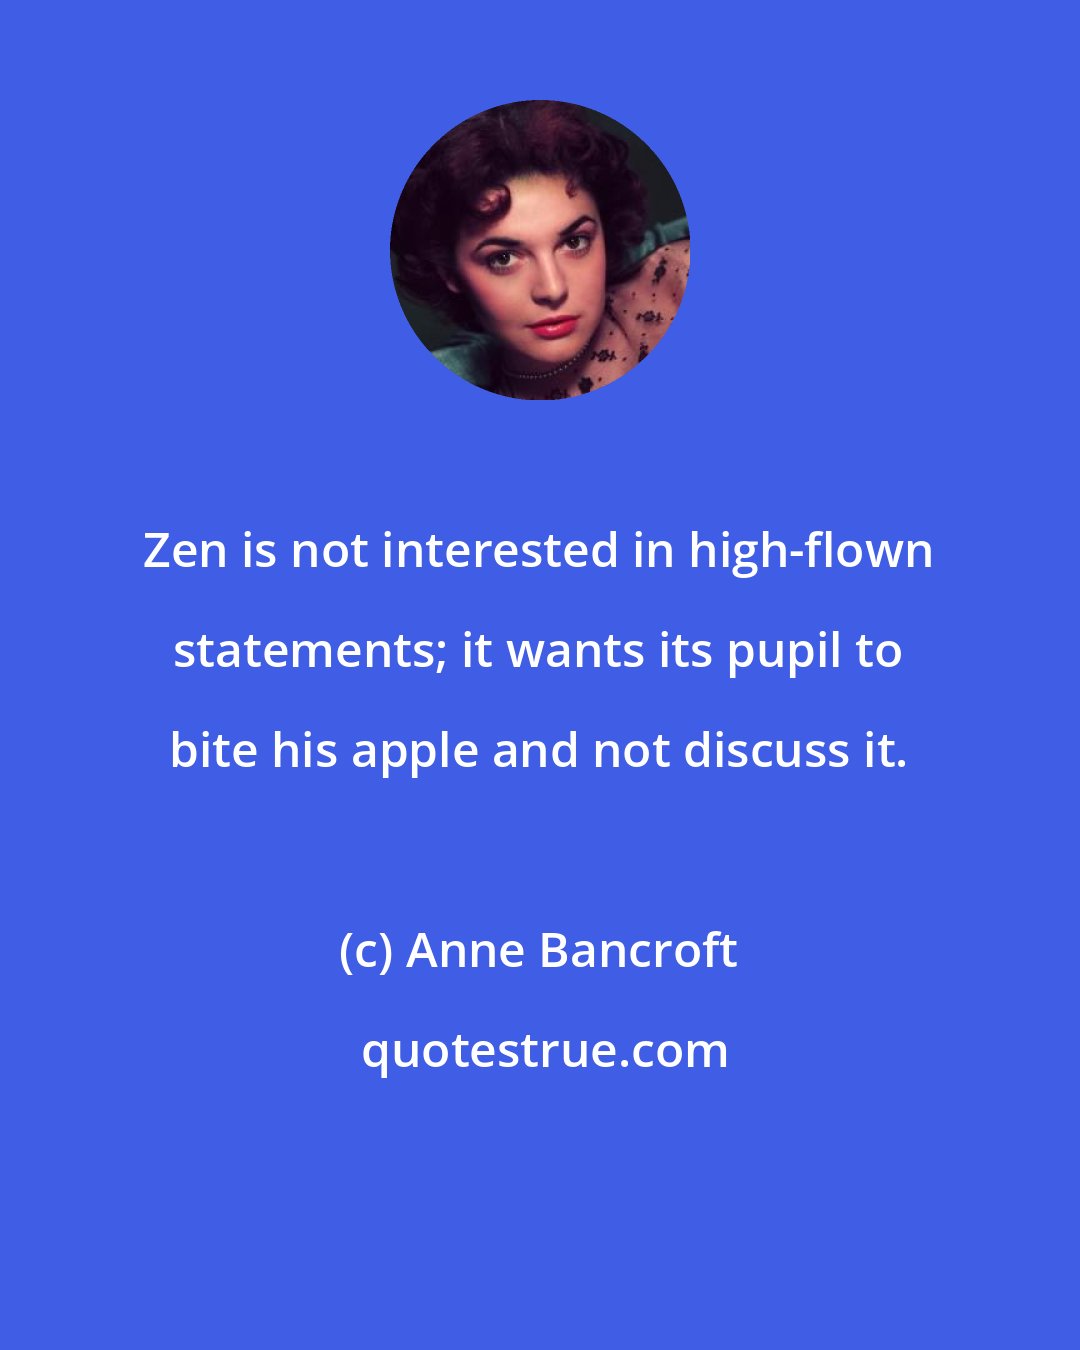 Anne Bancroft: Zen is not interested in high-flown statements; it wants its pupil to bite his apple and not discuss it.